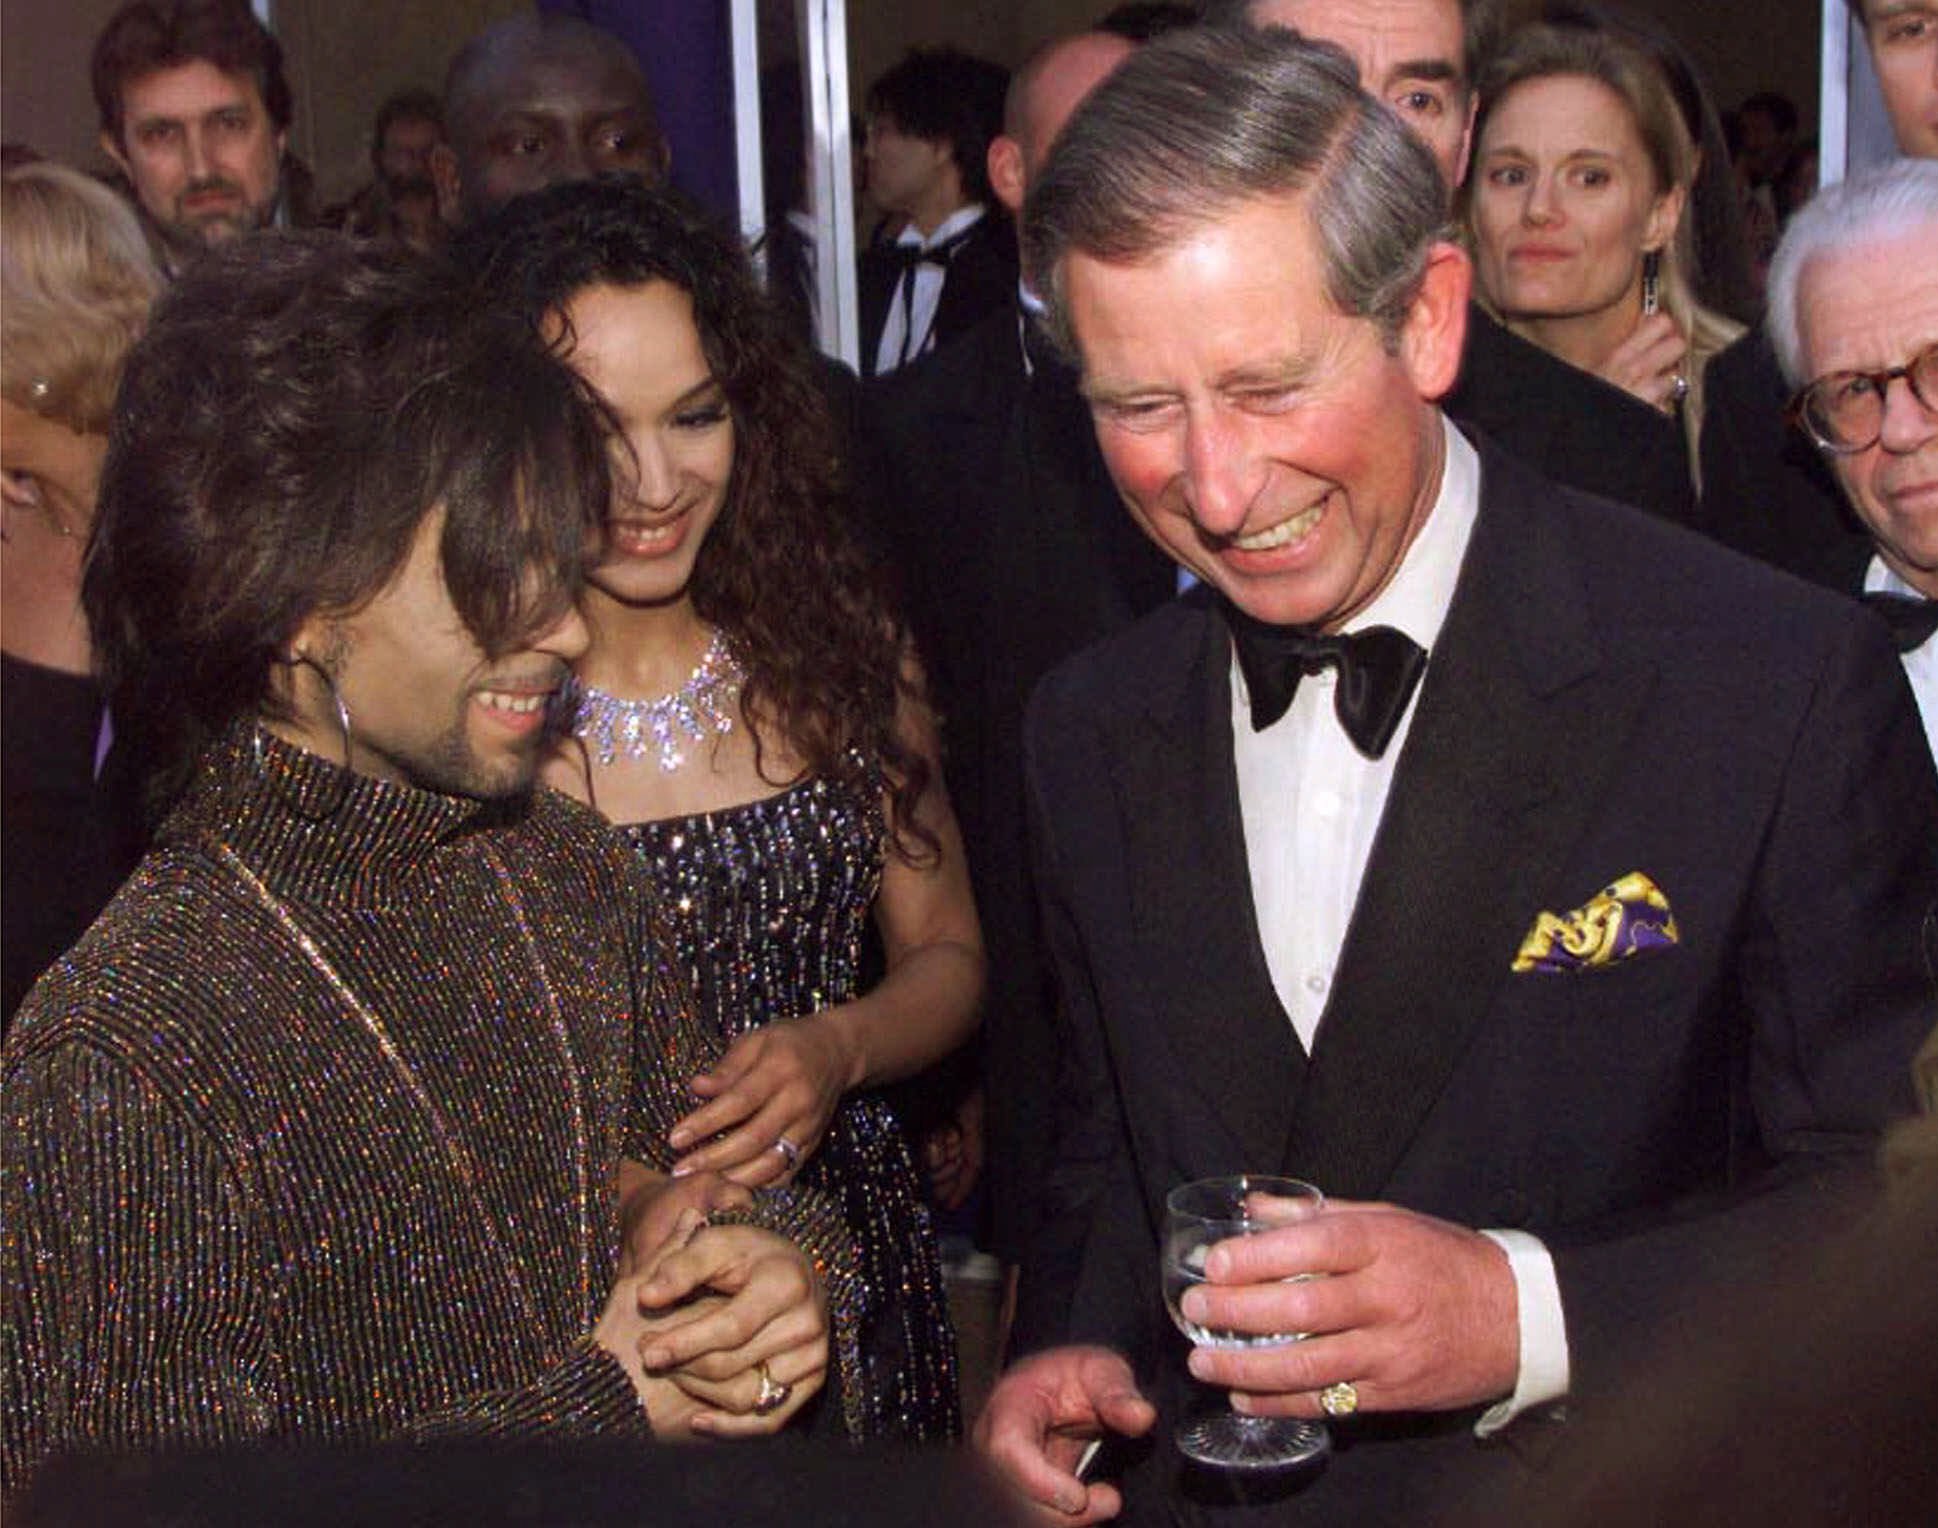 Prince Charles, right, talks with Prince, left, at the "Diamonds are Forever" celebration on June 9, 1999 in London.